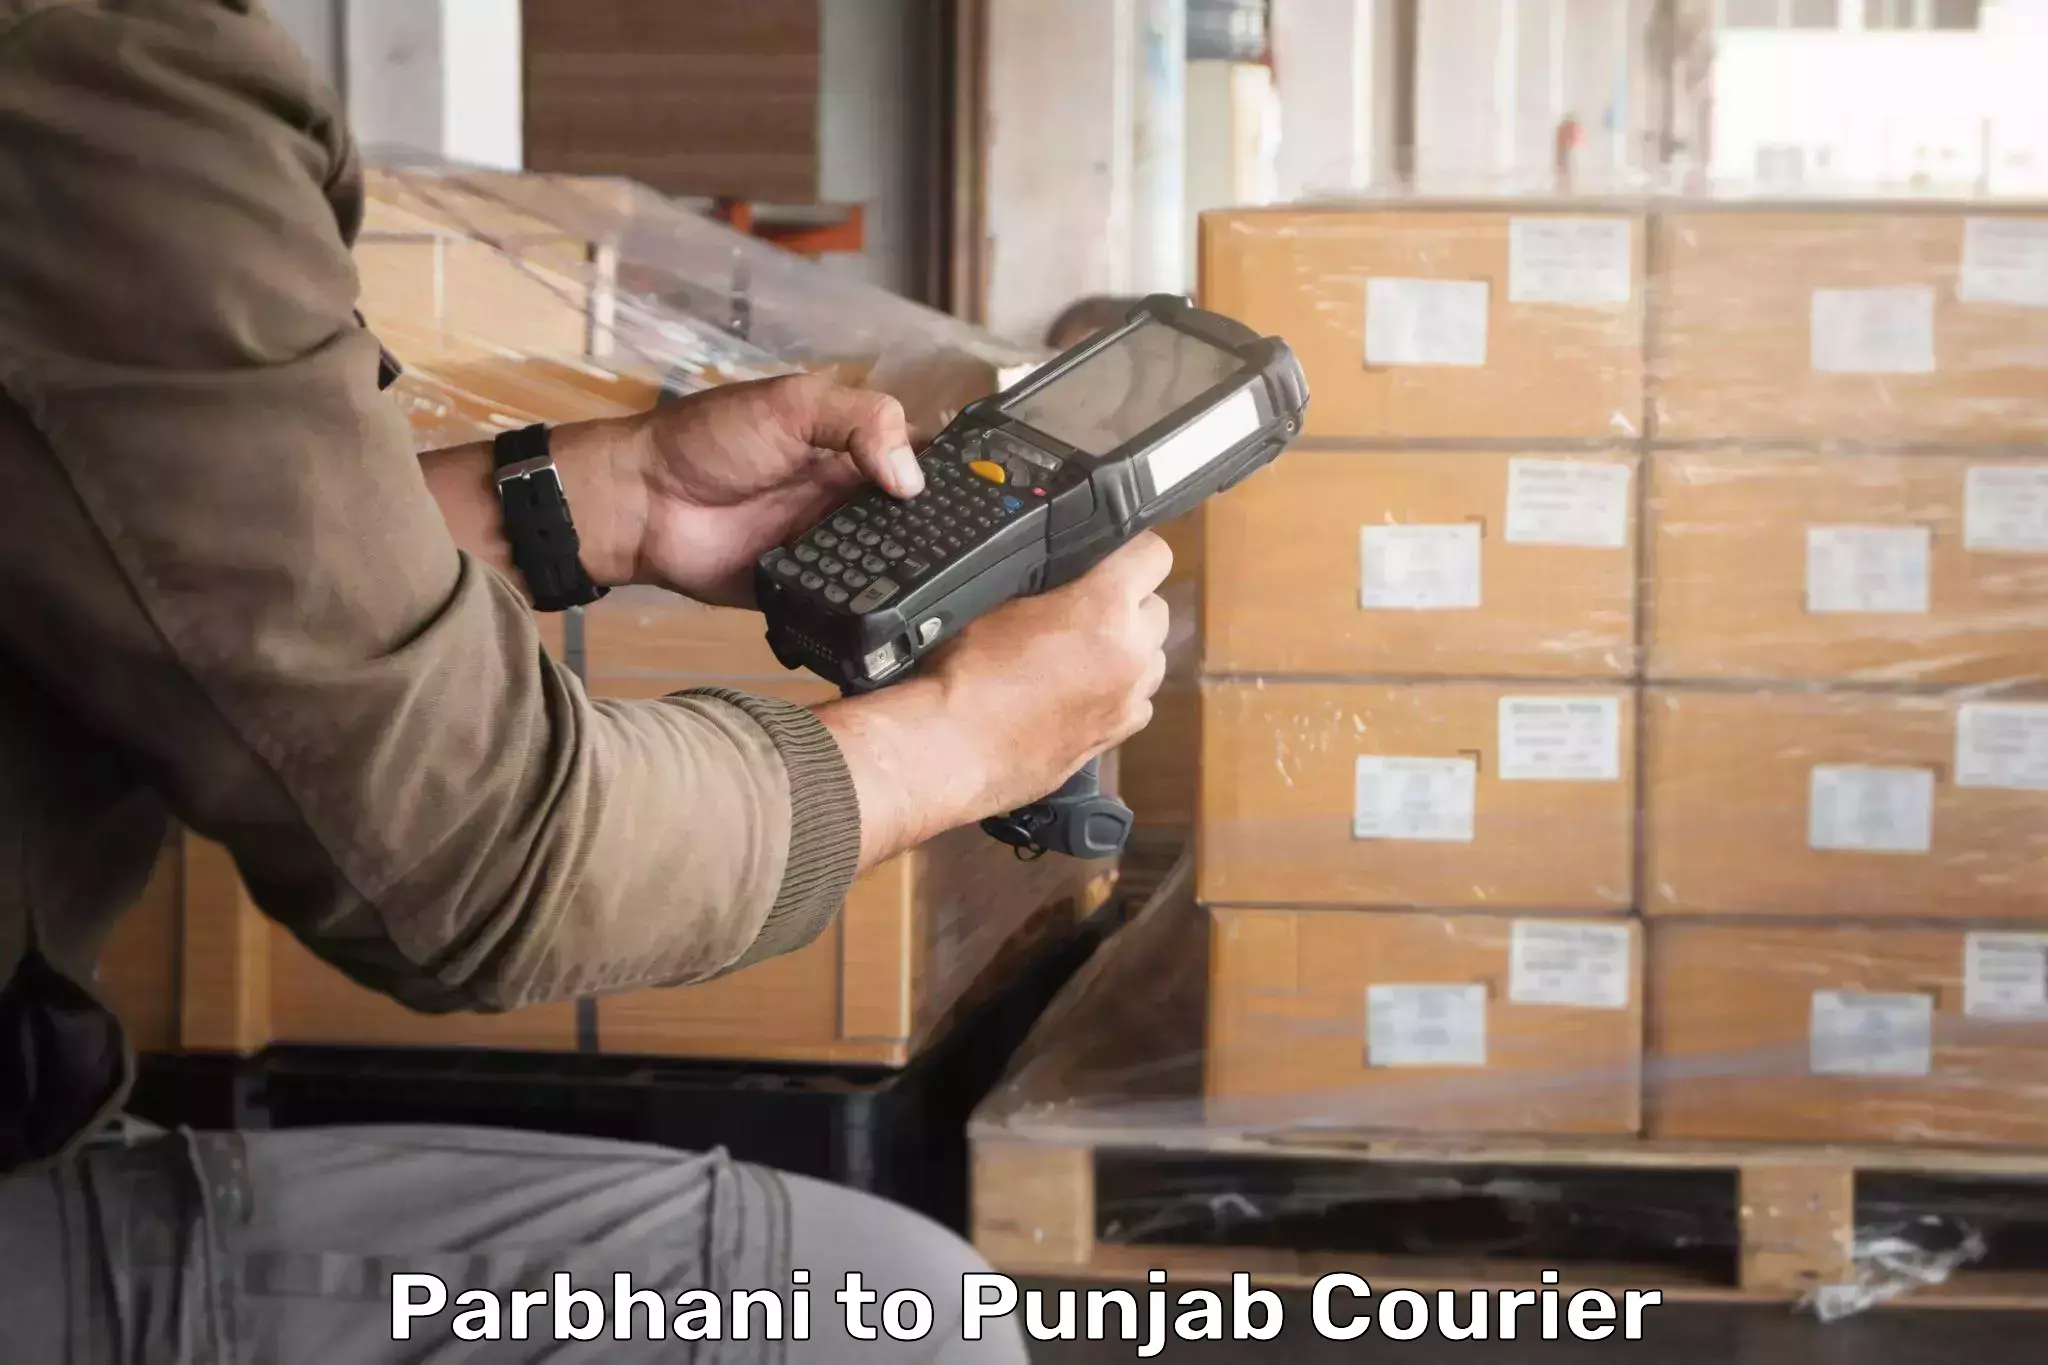 Bulk courier orders Parbhani to Mehta Chowk